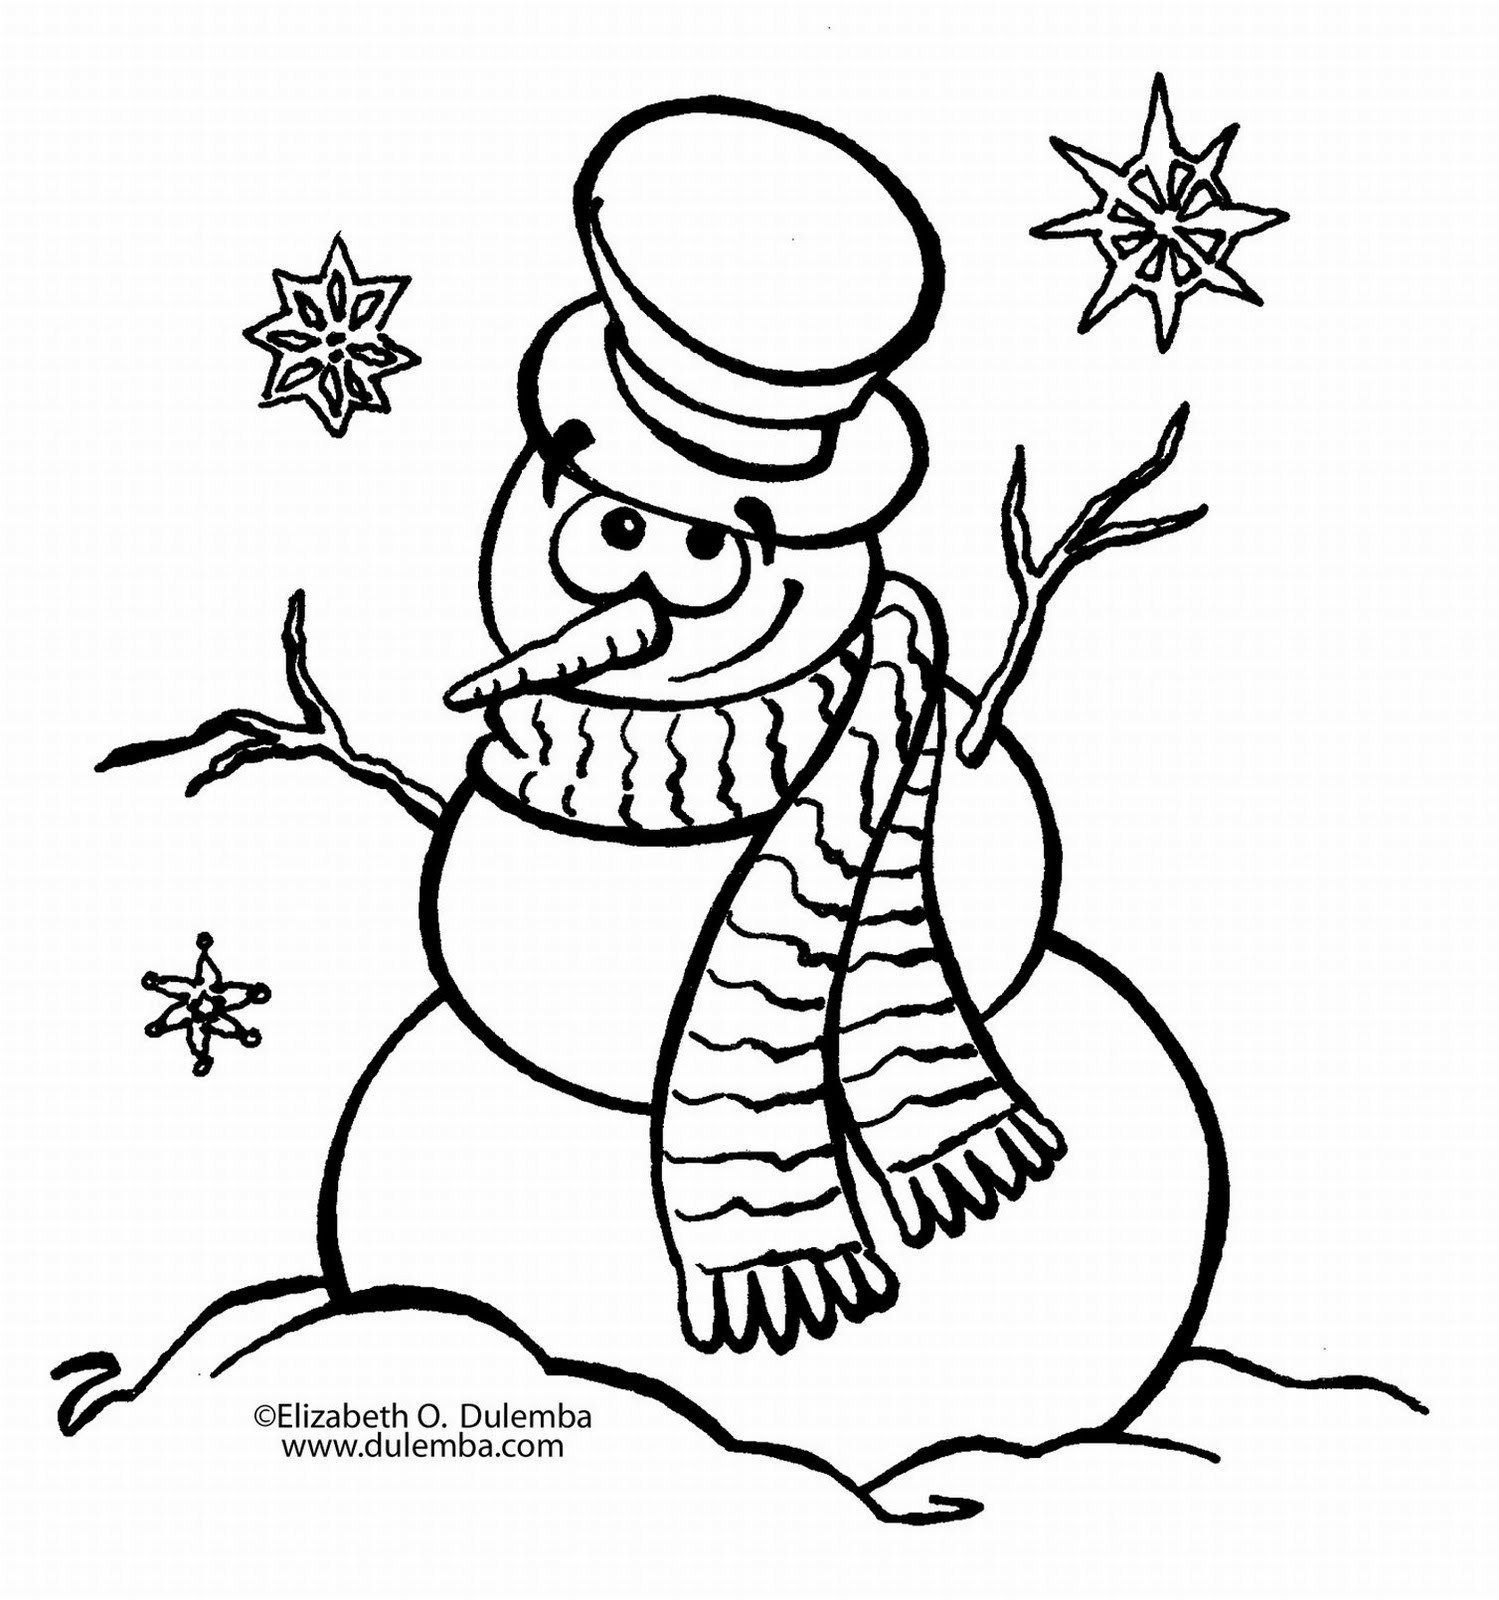 Snowman Coloring Pages To Download And Print For Free